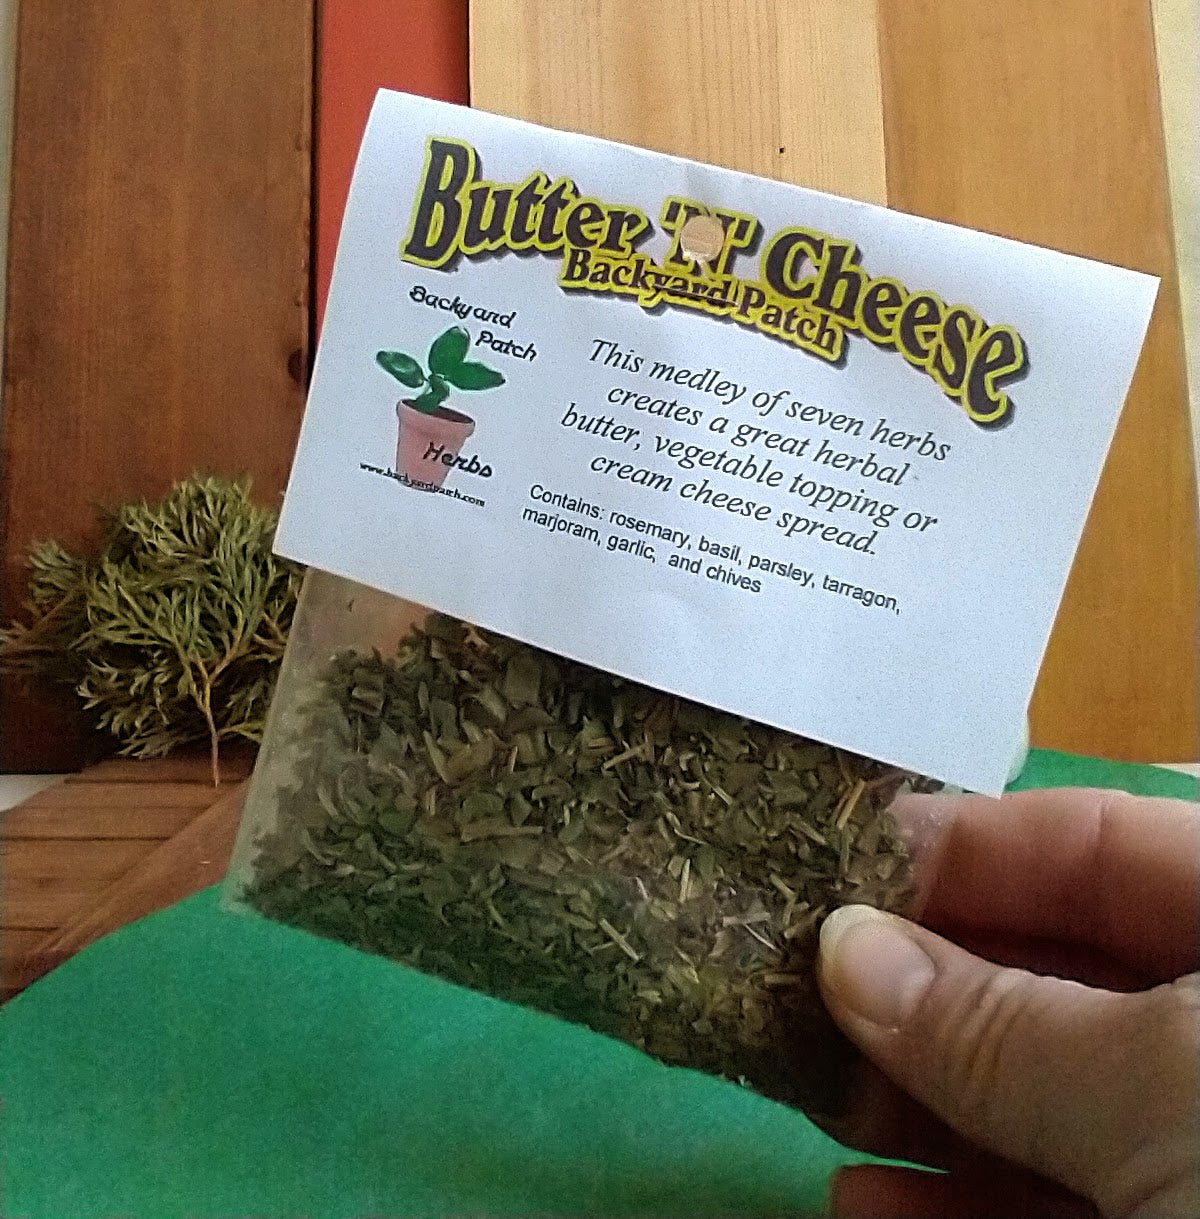 Flavored Butter or Cream Cheese Mix-ins Gift Set, dry herb seasoning blend, herb mix, cheese spread